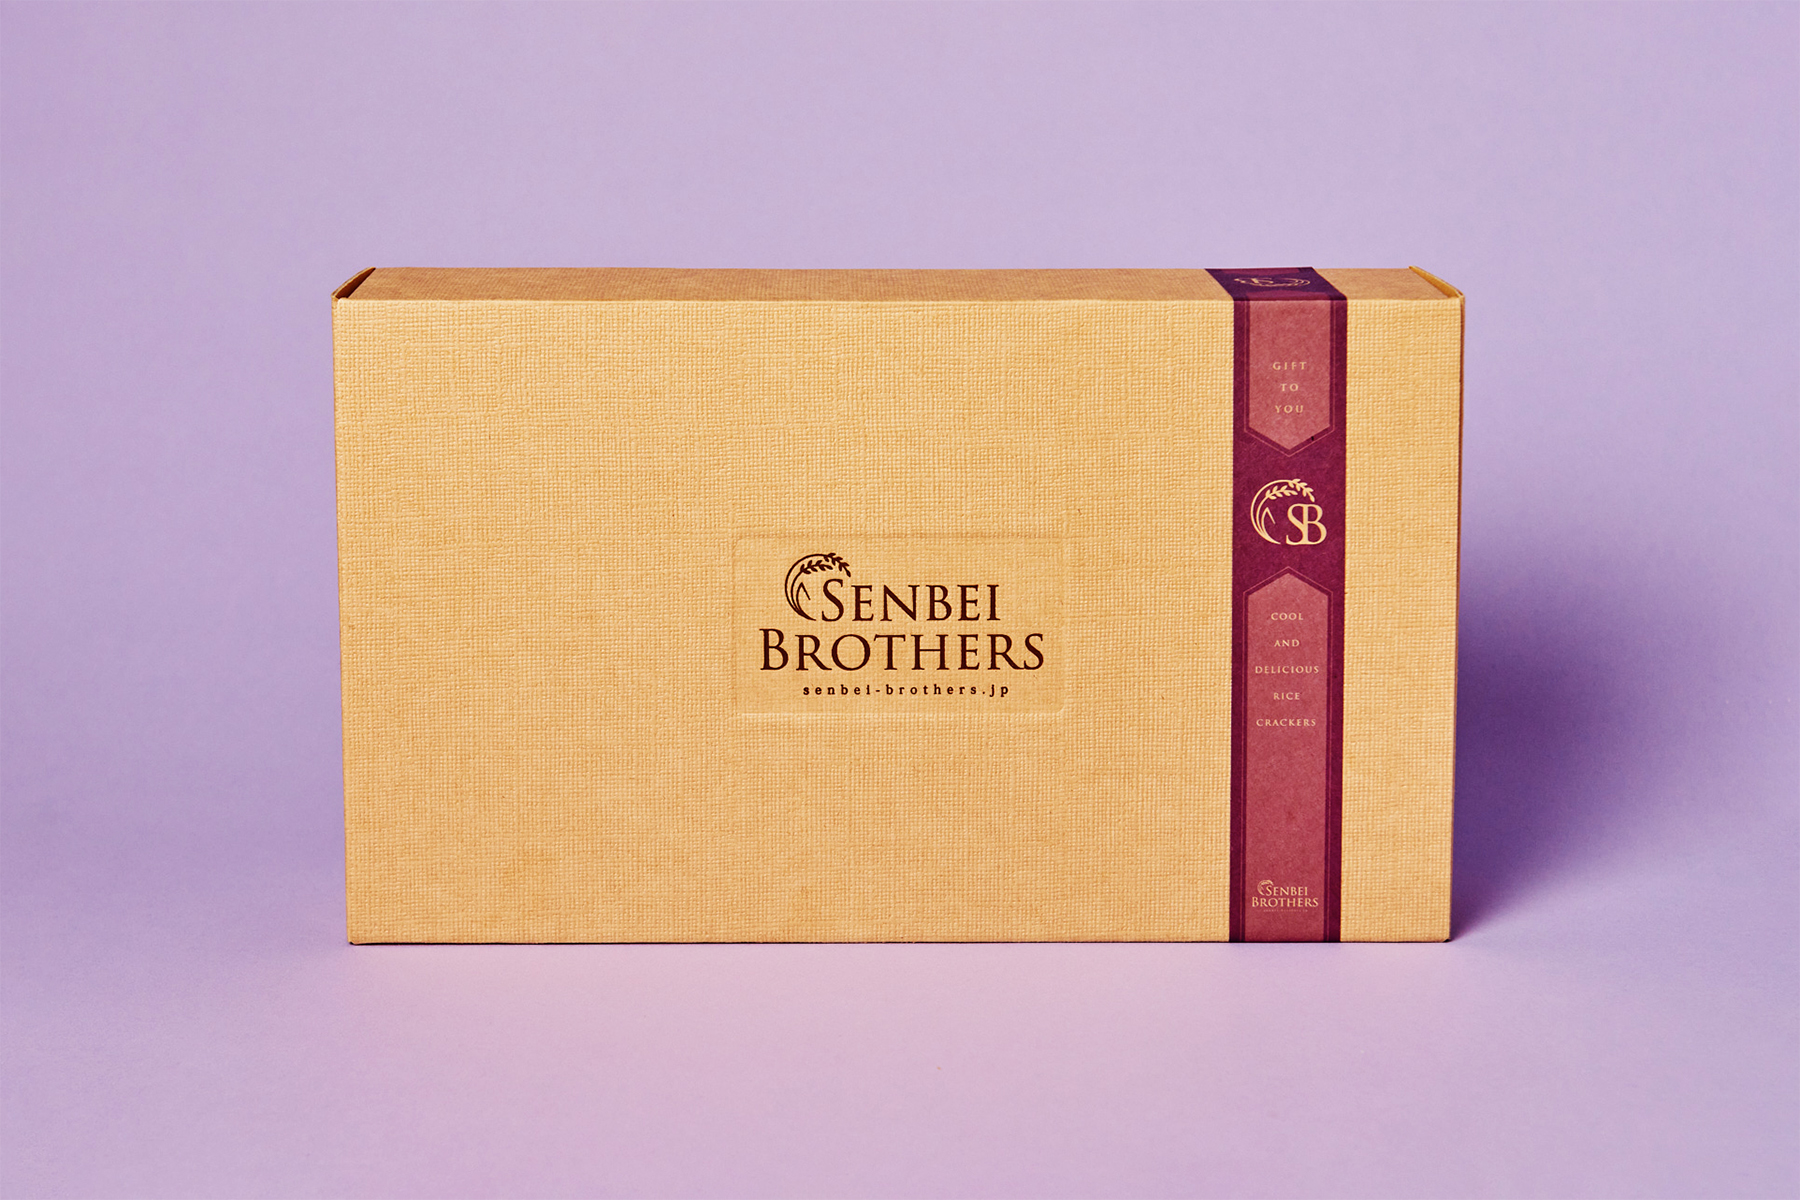 SENBEI BROTHERS ギフトセット ４個入